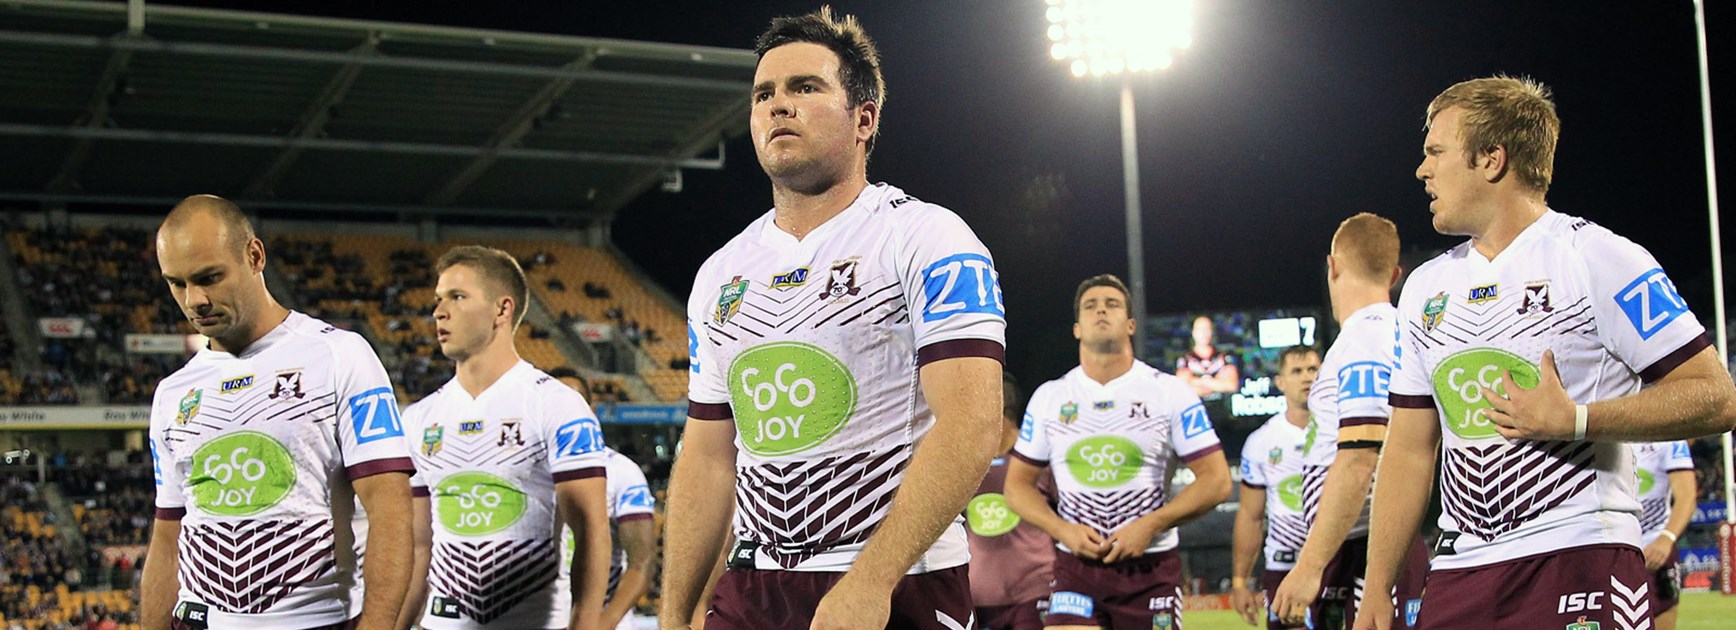 Manly players following their win over the Warriors in Auckland.